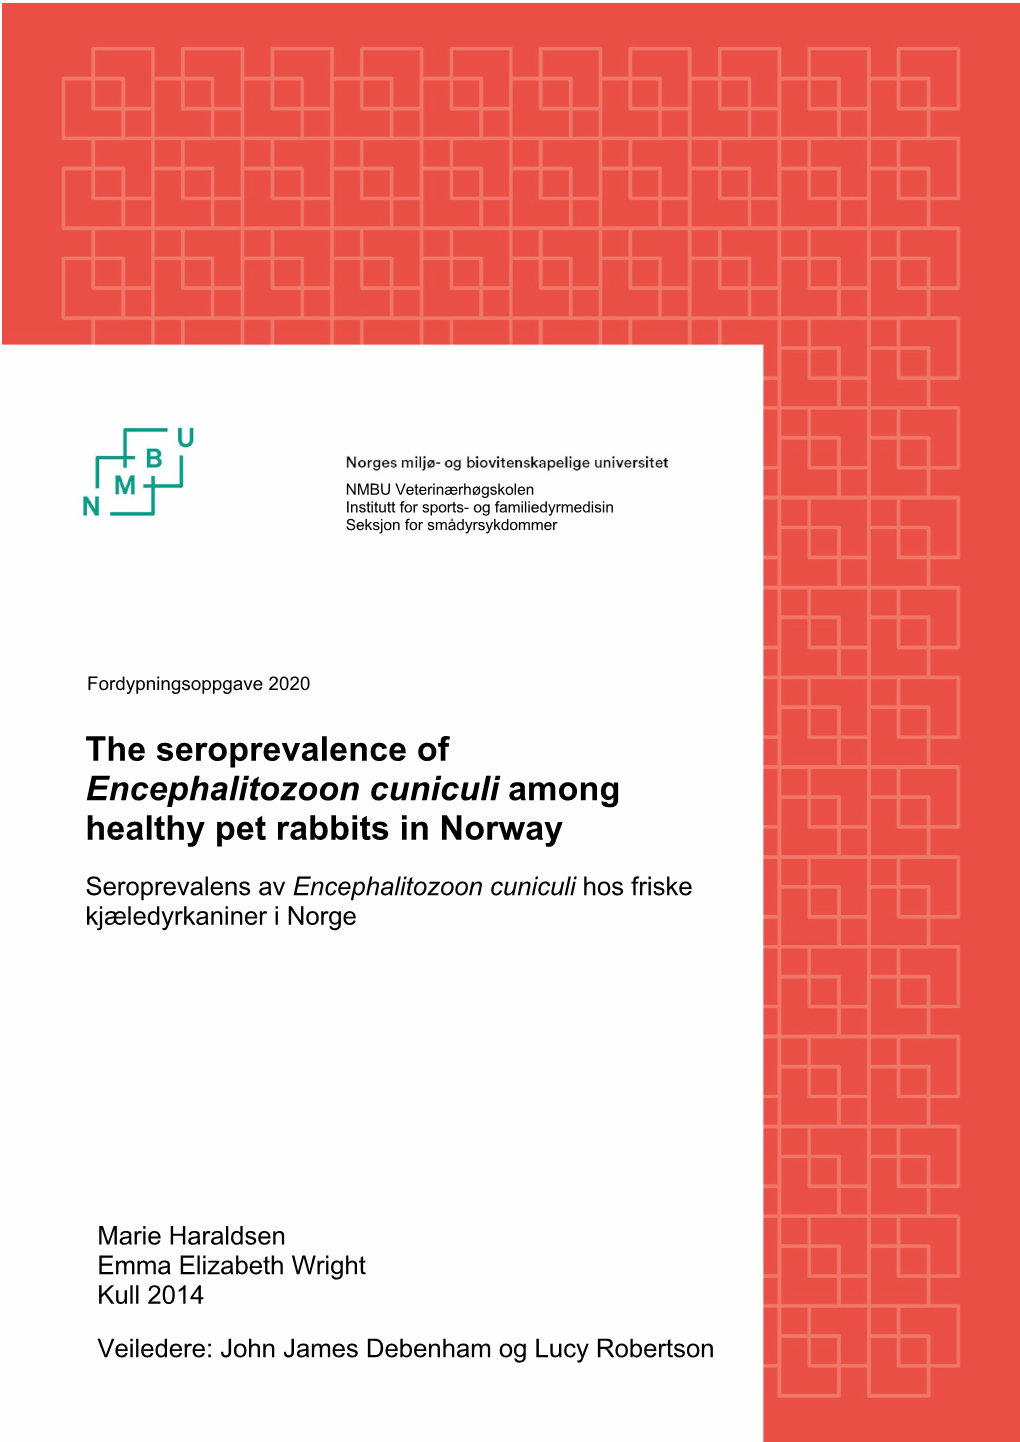 The Seroprevalence of Encephalitozoon Cuniculi Among Healthy Pet Rabbits in Norway